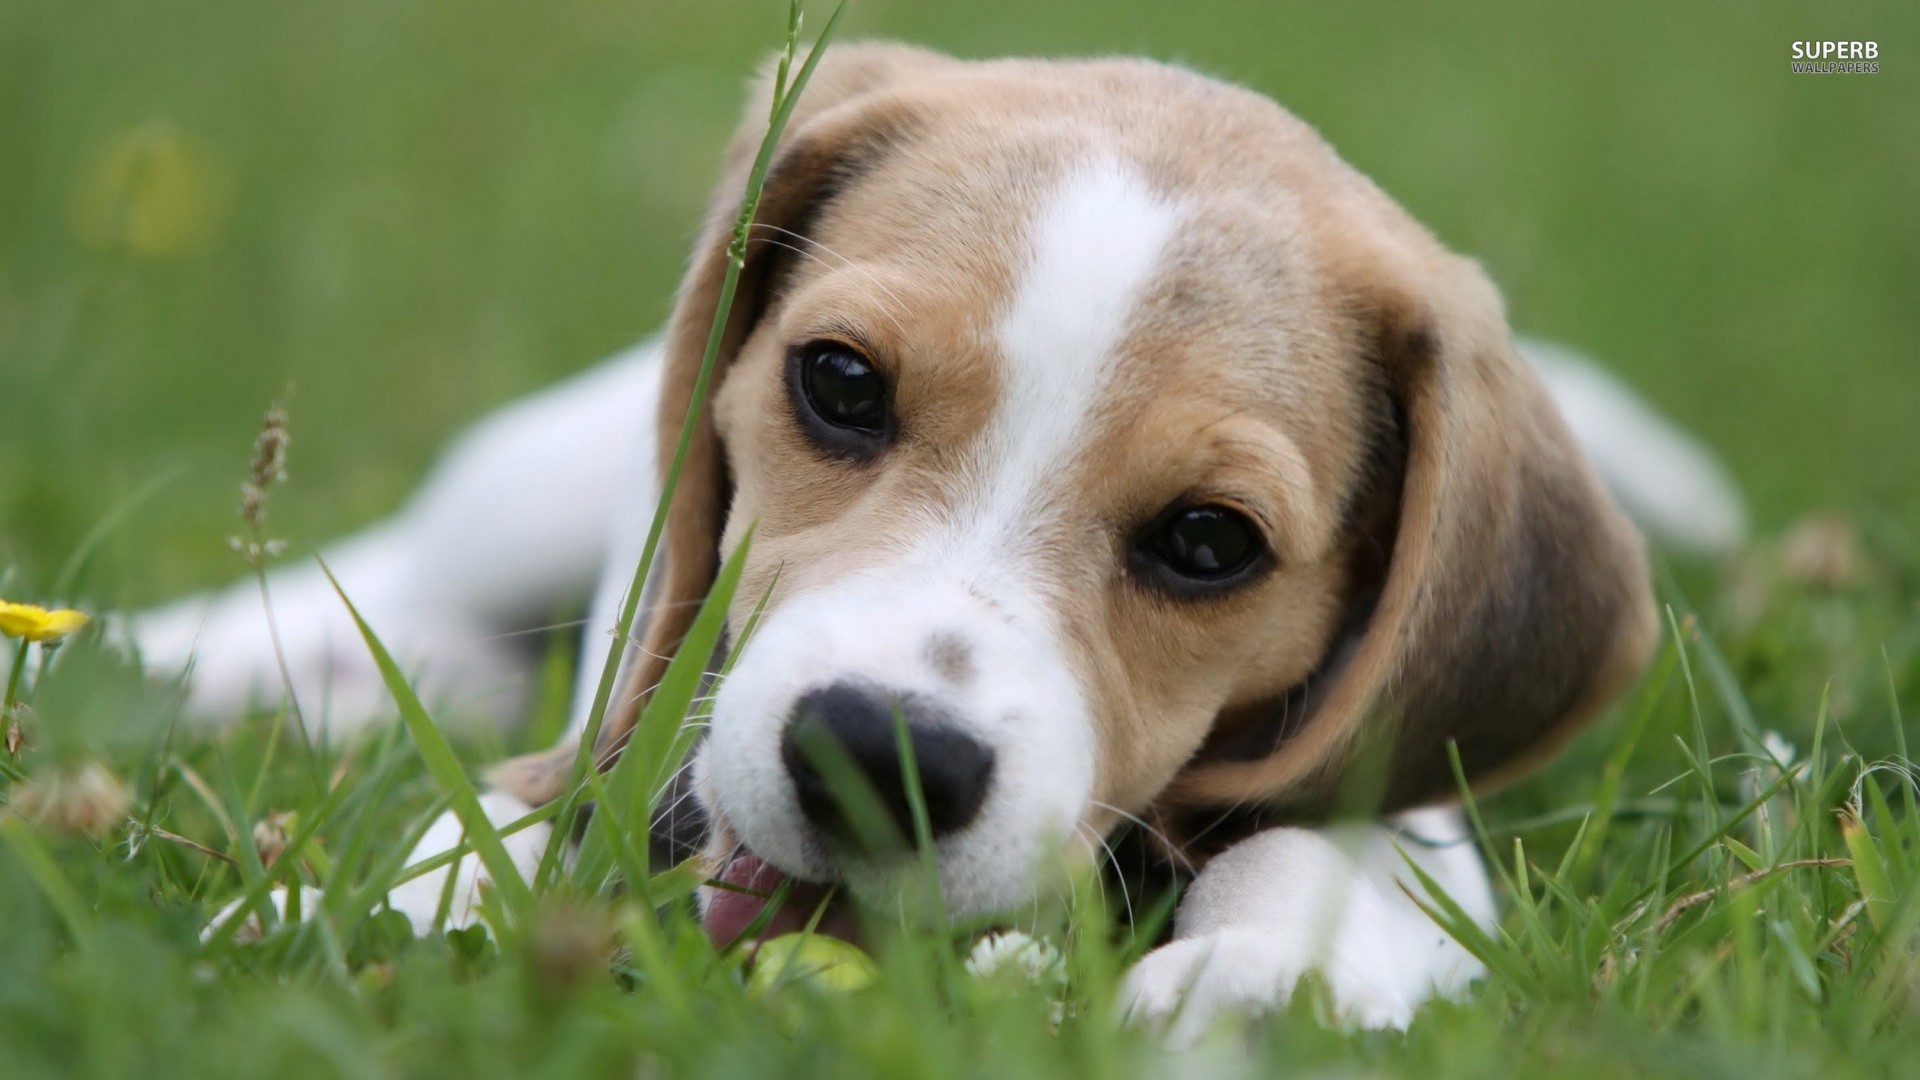 Cute Beagle Dog Lying On The Grass Wallpaper And Image